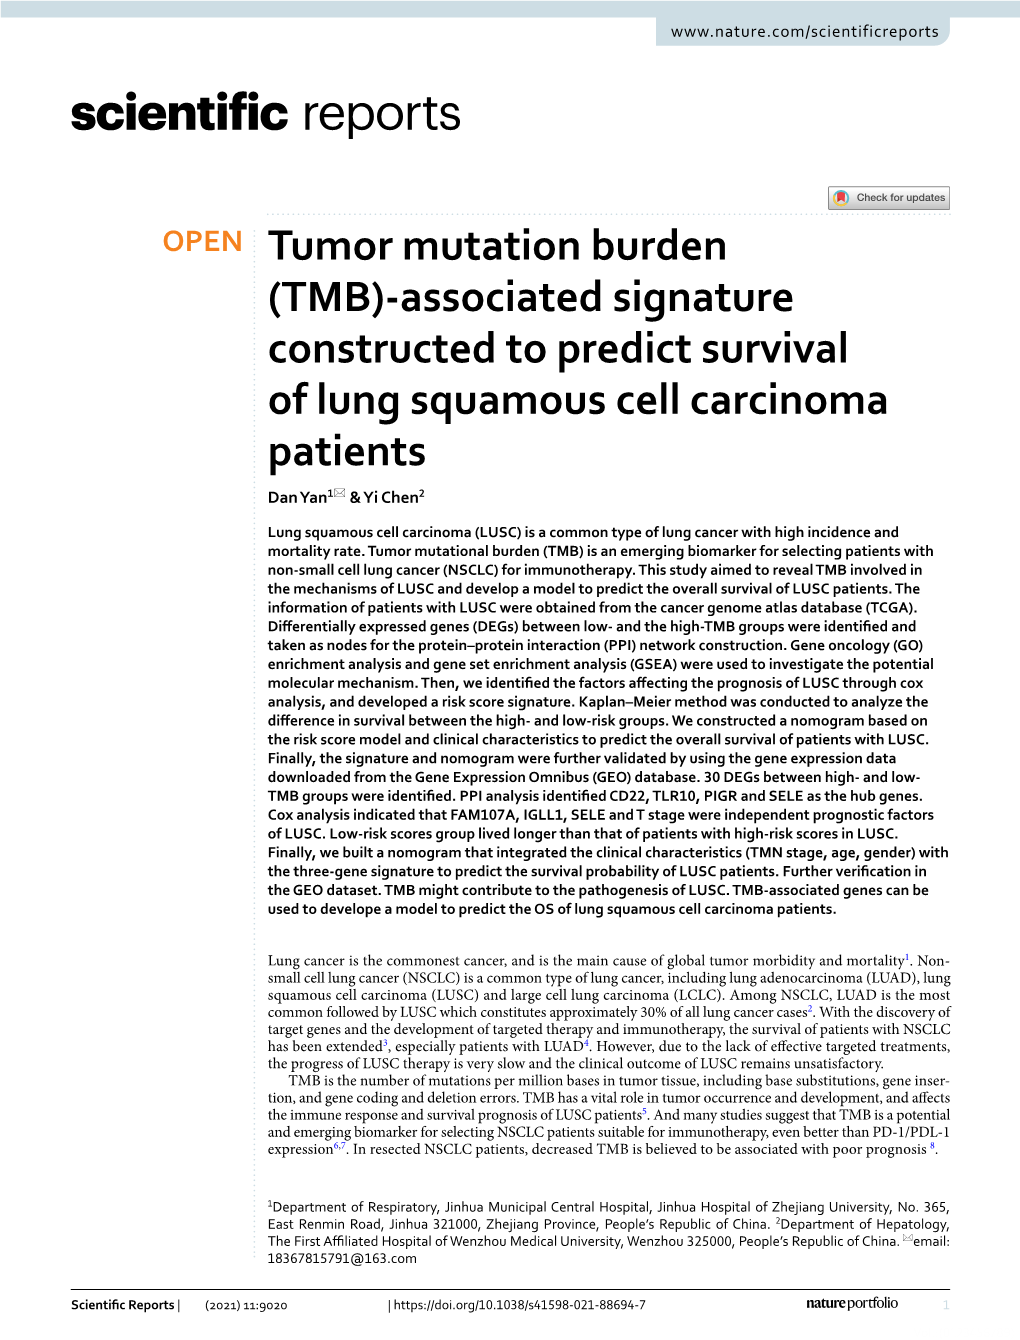 Tumor Mutation Burden (TMB)‑Associated Signature Constructed to Predict Survival of Lung Squamous Cell Carcinoma Patients Dan Yan1* & Yi Chen2